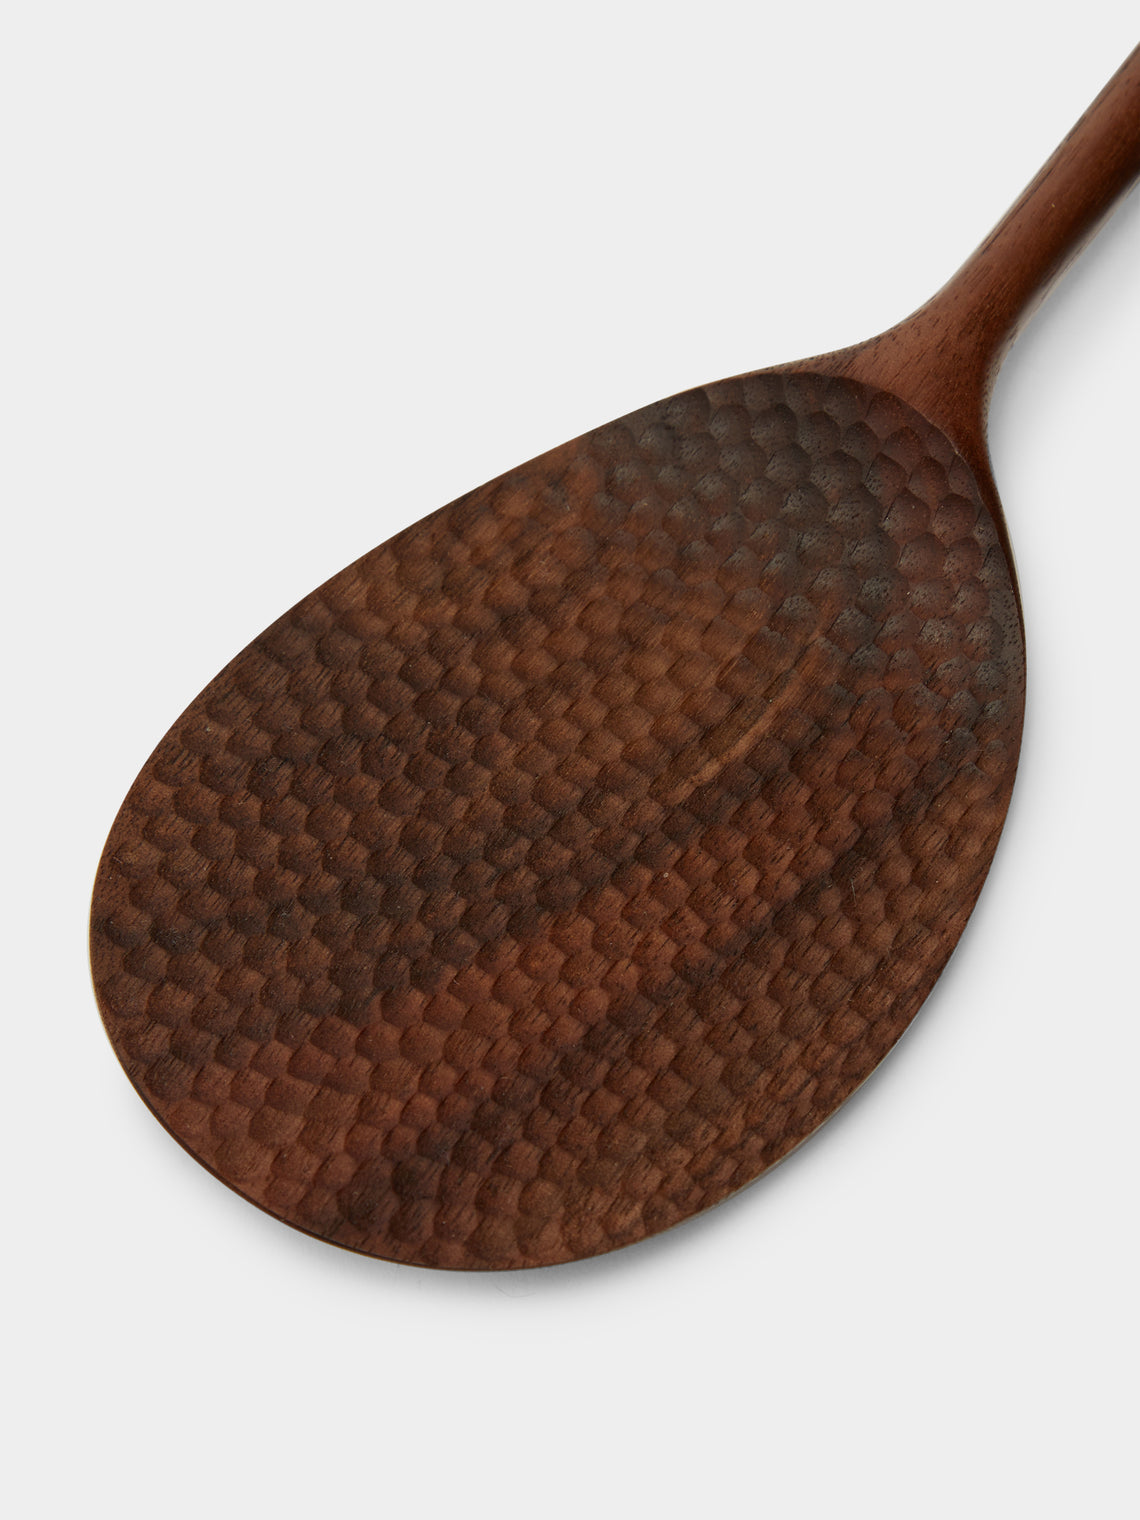 Hand-Etched Walnut Rice Paddle